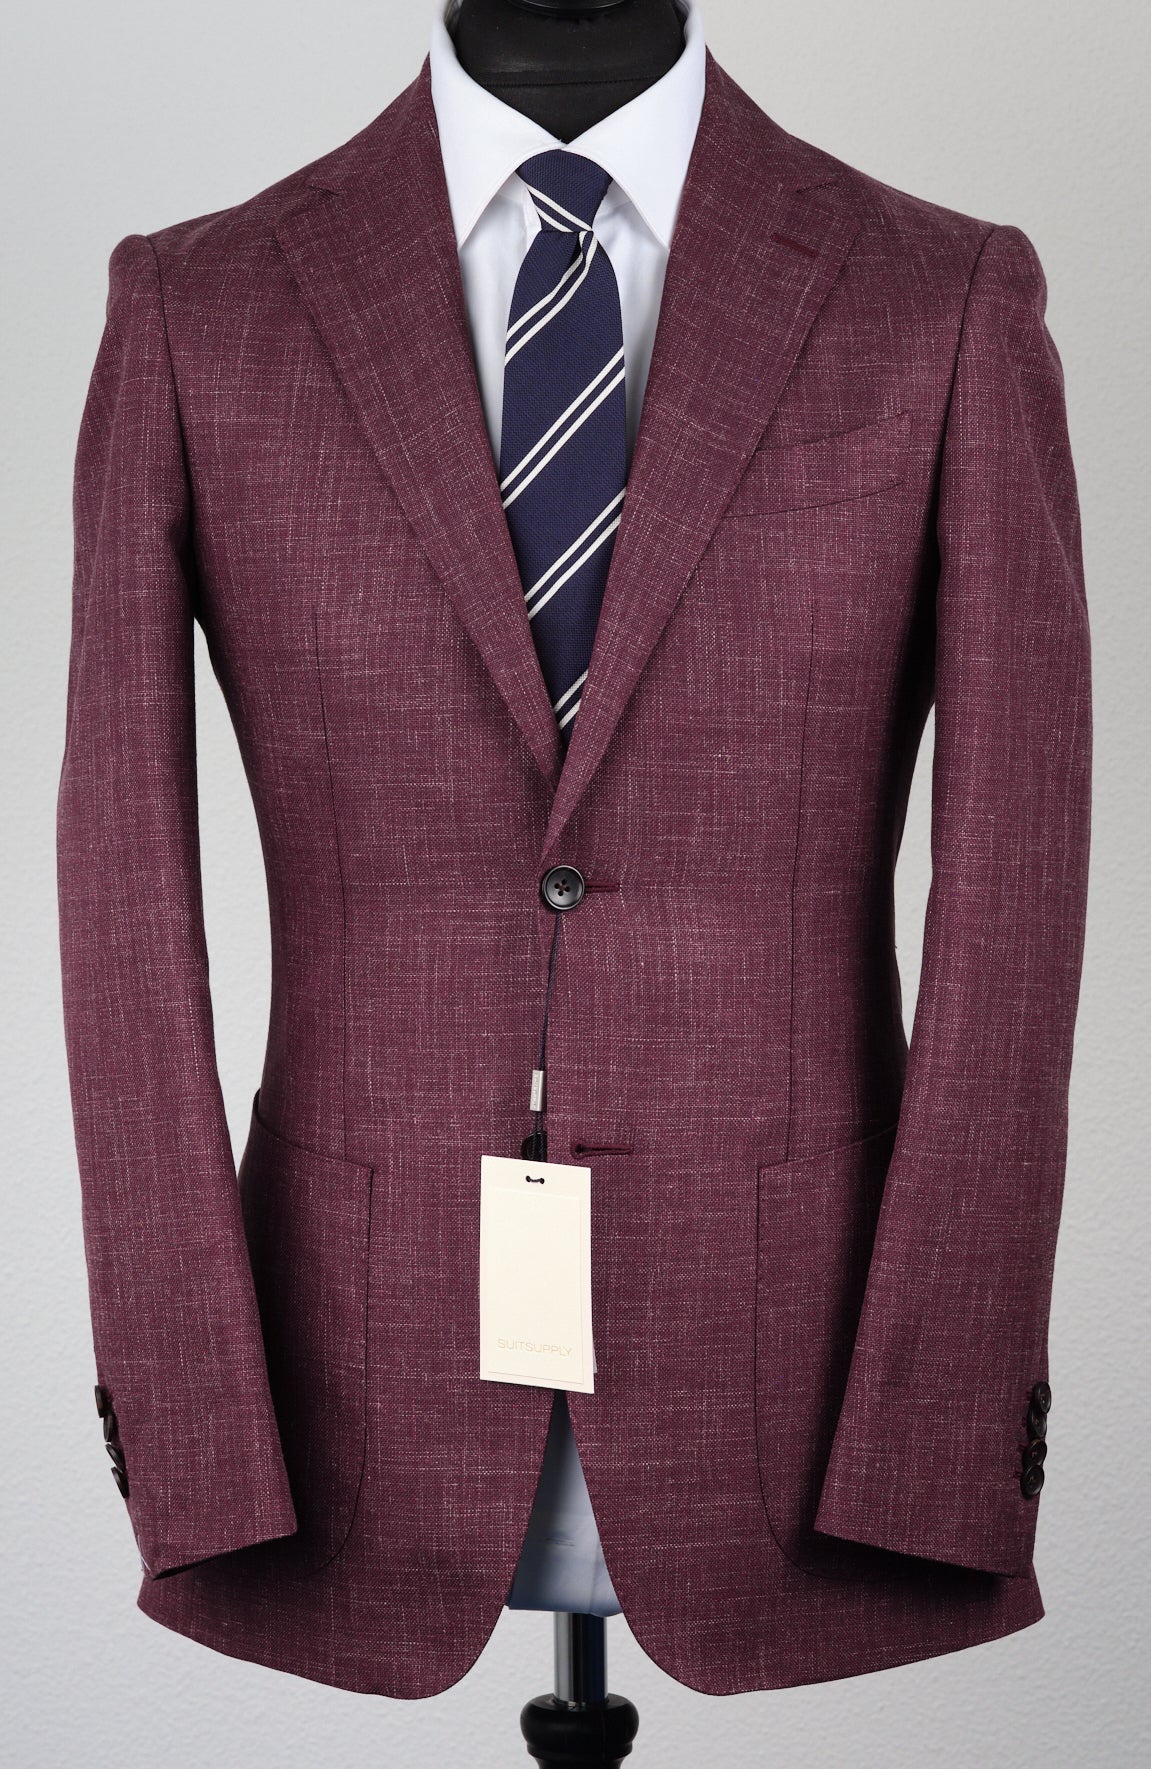 New Suitsupply Havana Purple Wool, Mulberry Silk and Linen Suit - Size 42L